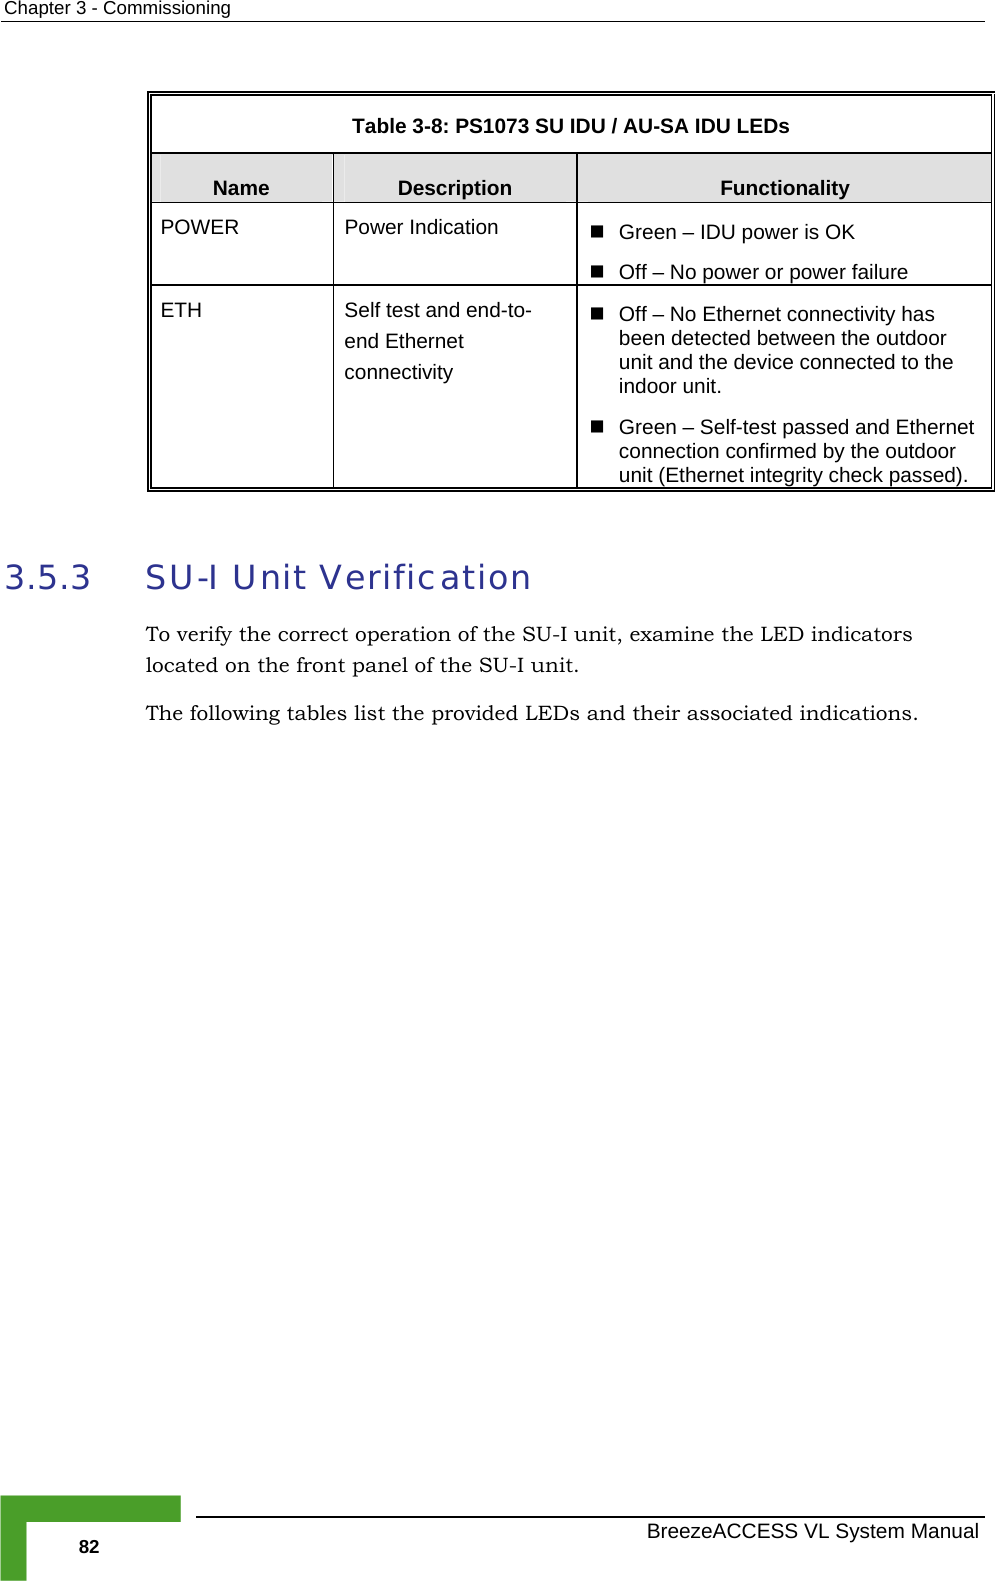 Chapter  3 - Commissioning   BreezeACCESS VL System Manual 82  Table  3-8: PS1073 SU IDU / AU-SA IDU LEDs Name   Description  Functionality POWER Power Indication   Green – IDU power is OK   Off – No power or power failure ETH  Self test and end-to-end Ethernet connectivity   Off – No Ethernet connectivity has been detected between the outdoor unit and the device connected to the indoor unit.   Green – Self-test passed and Ethernet connection confirmed by the outdoor unit (Ethernet integrity check passed).  3.5.3 SU-I Unit Verification To verify the correct operation of the SU-I unit, examine the LED indicators located on the front panel of the SU-I unit. The following tables list the provided LEDs and their associated indications. 